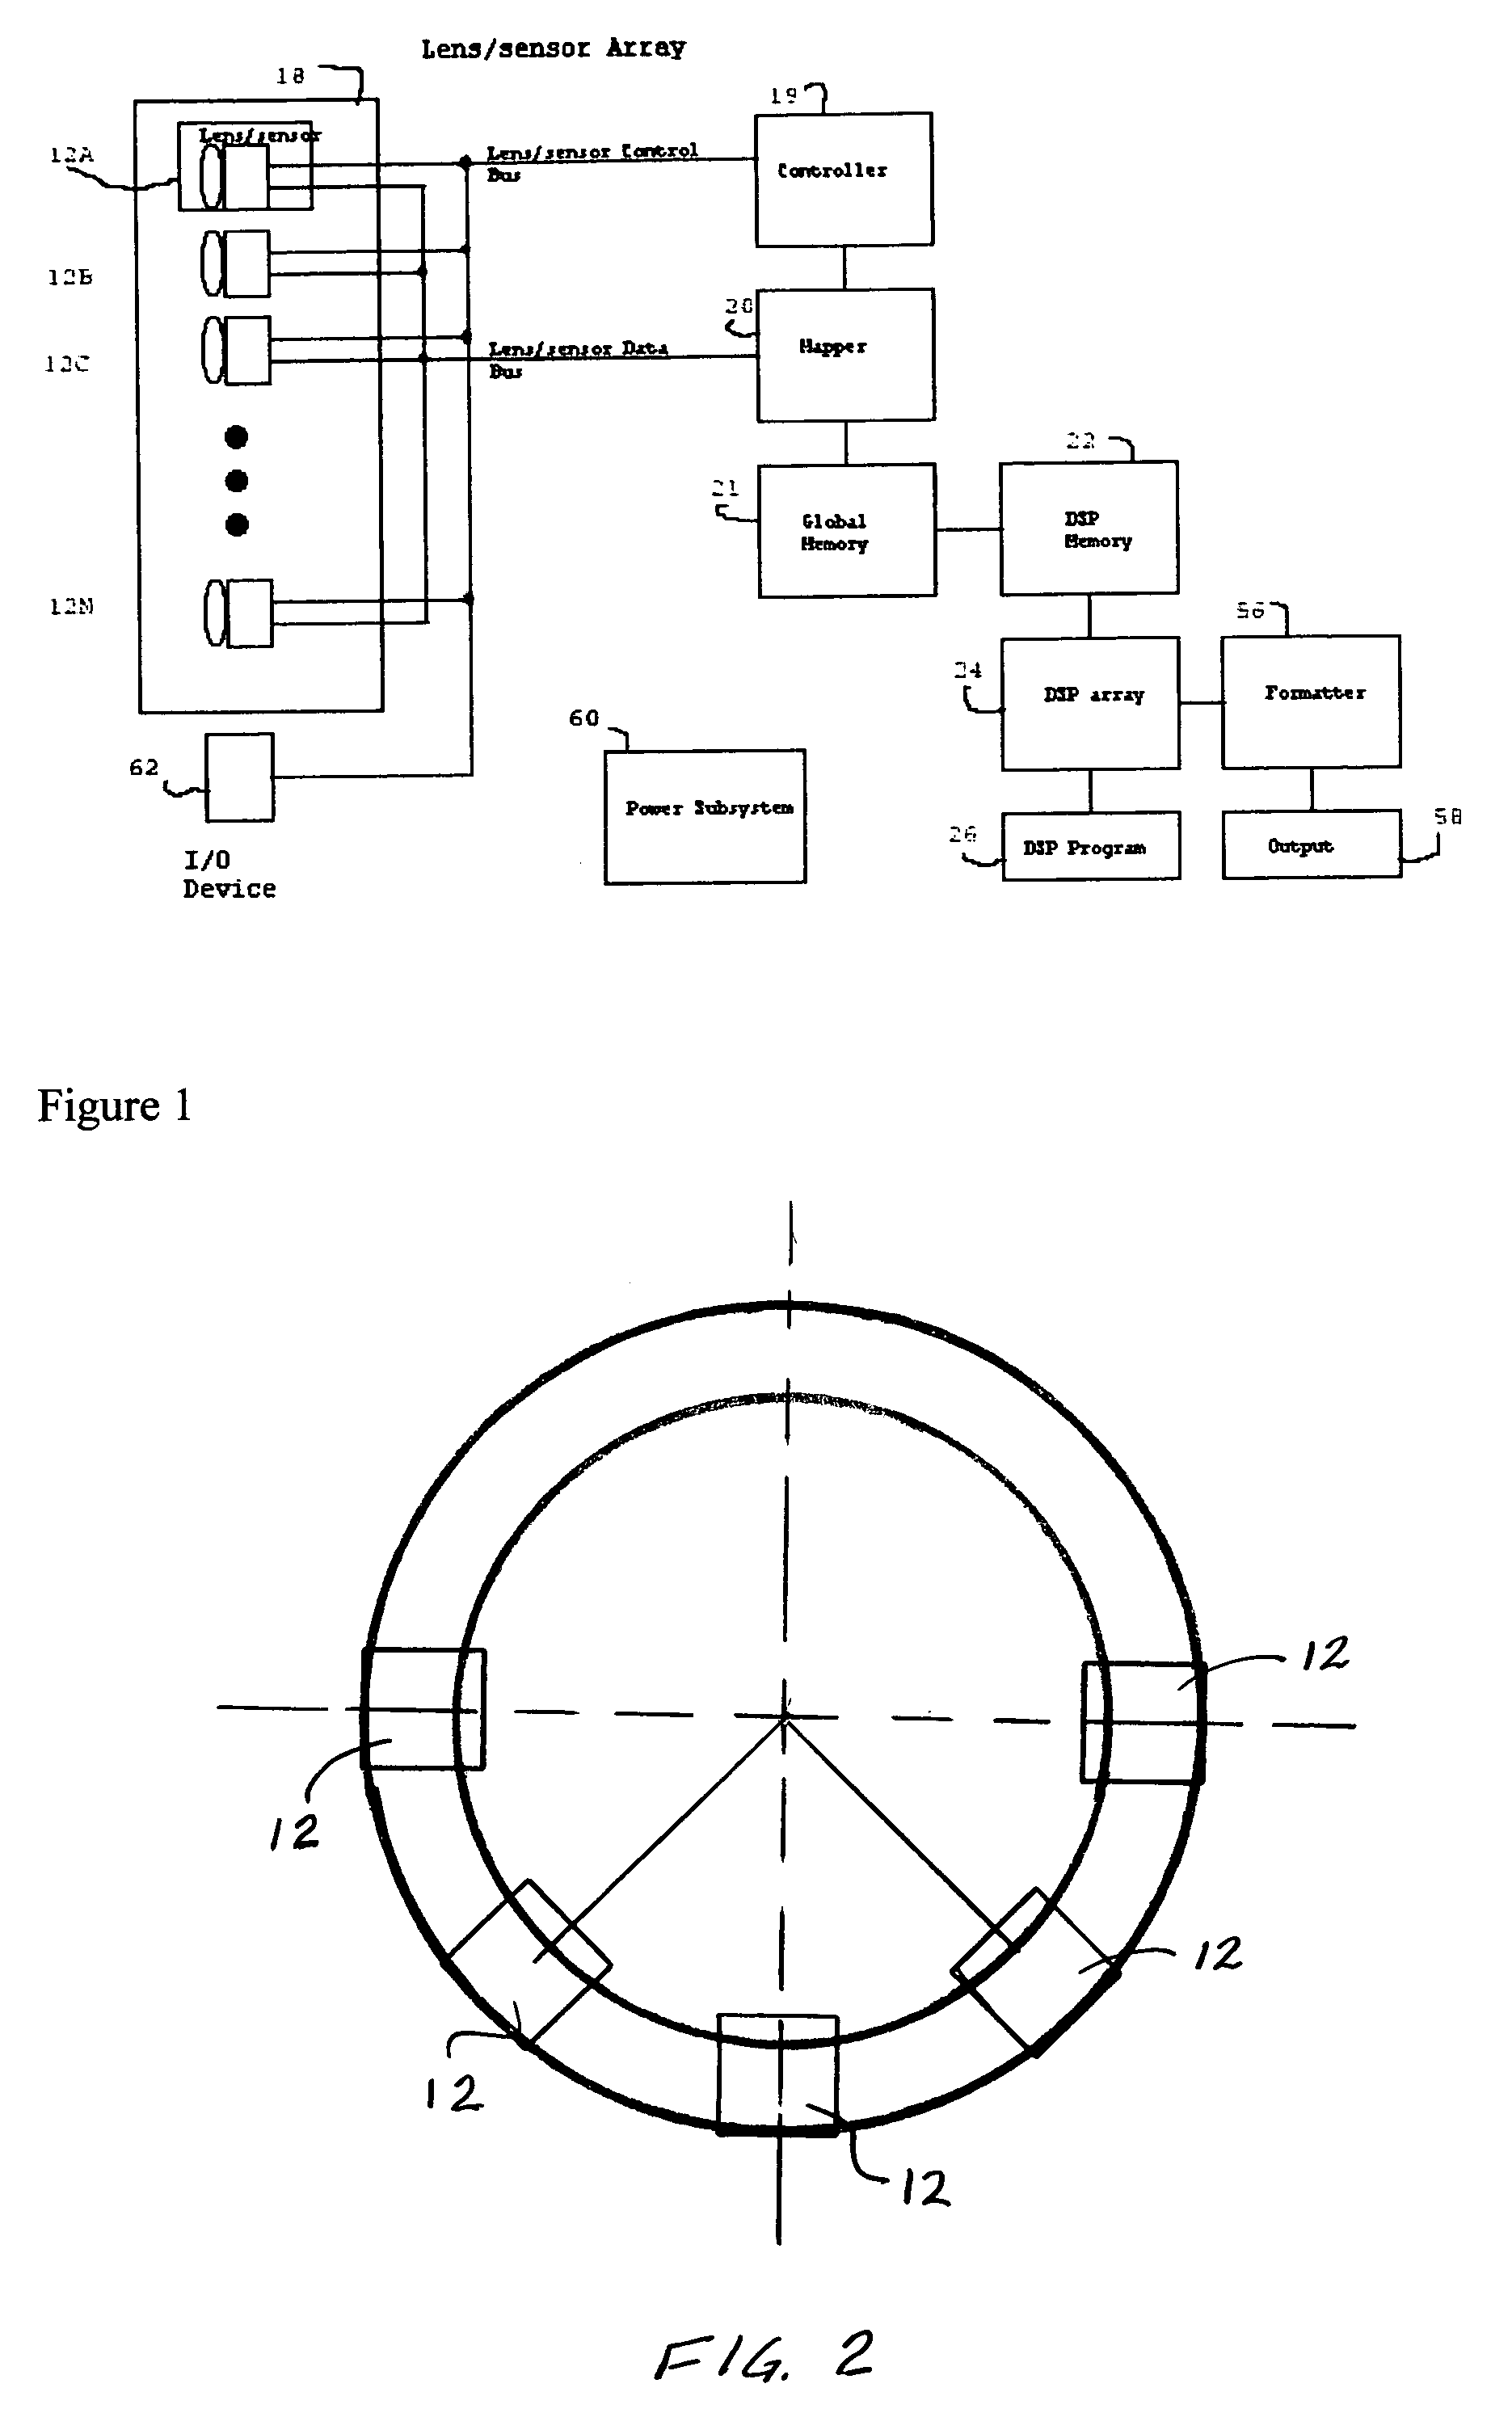 Digital imaging system using overlapping images to formulate a seamless composite image and implemented using either a digital imaging sensor array